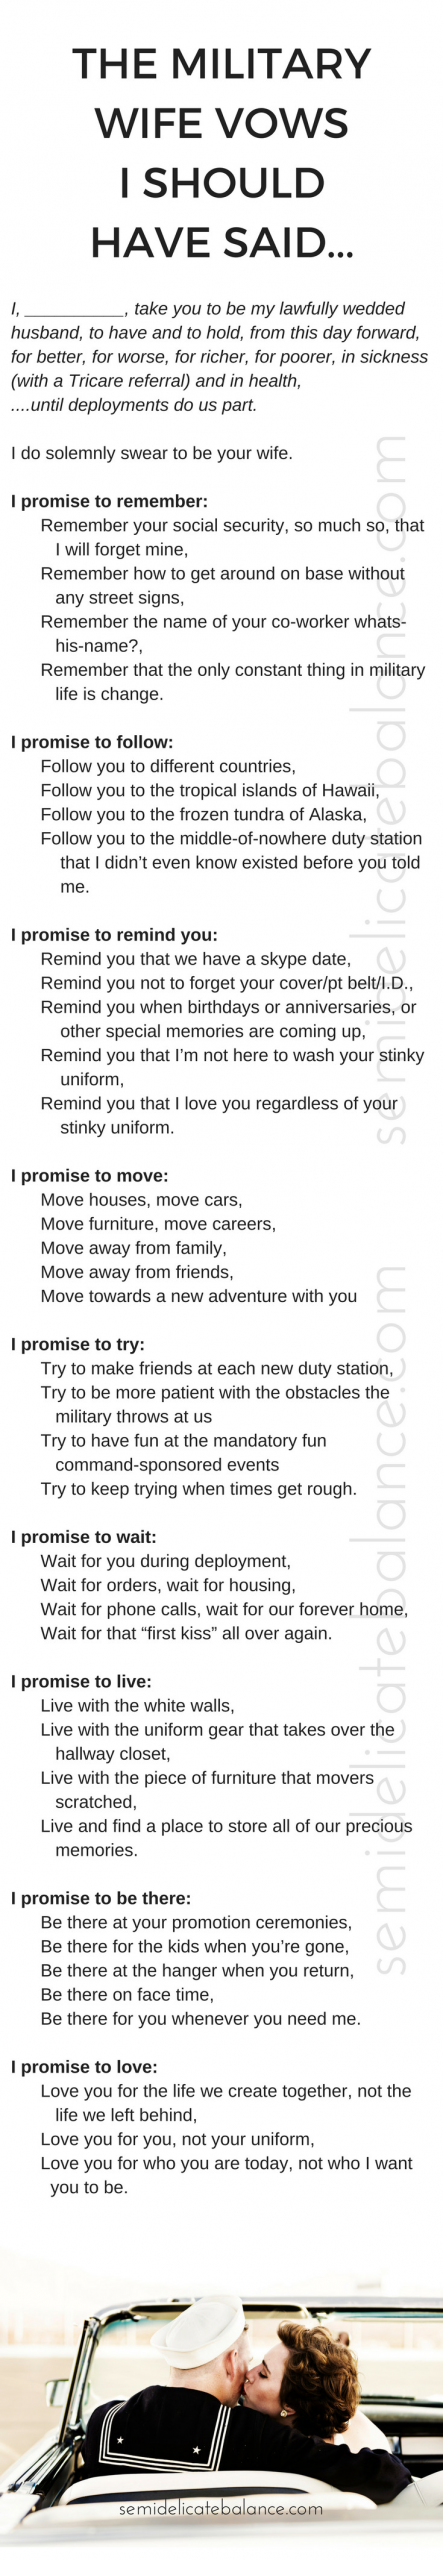 Military Wedding Vows
 The Military Wife Vows I Should Have Said